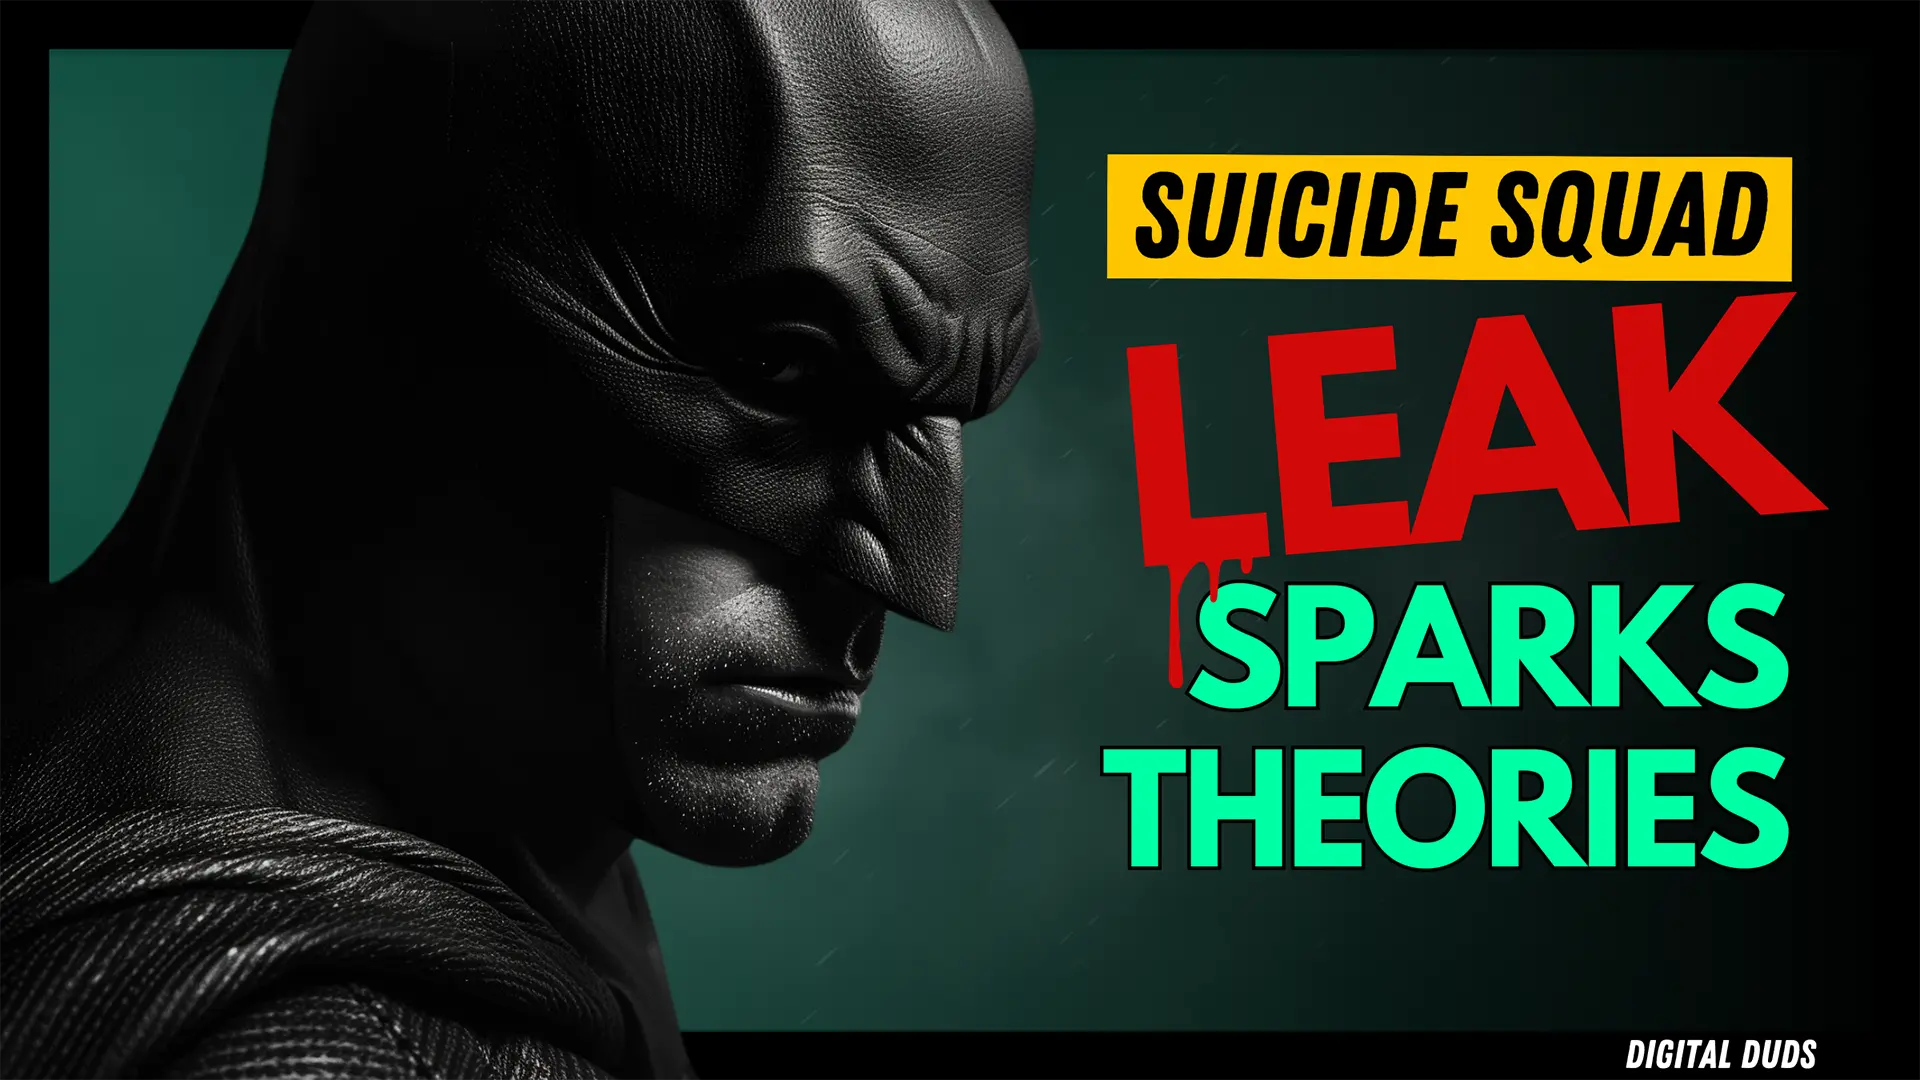 Batman’s Grand Return to Suicide Squad? Theories Explode!